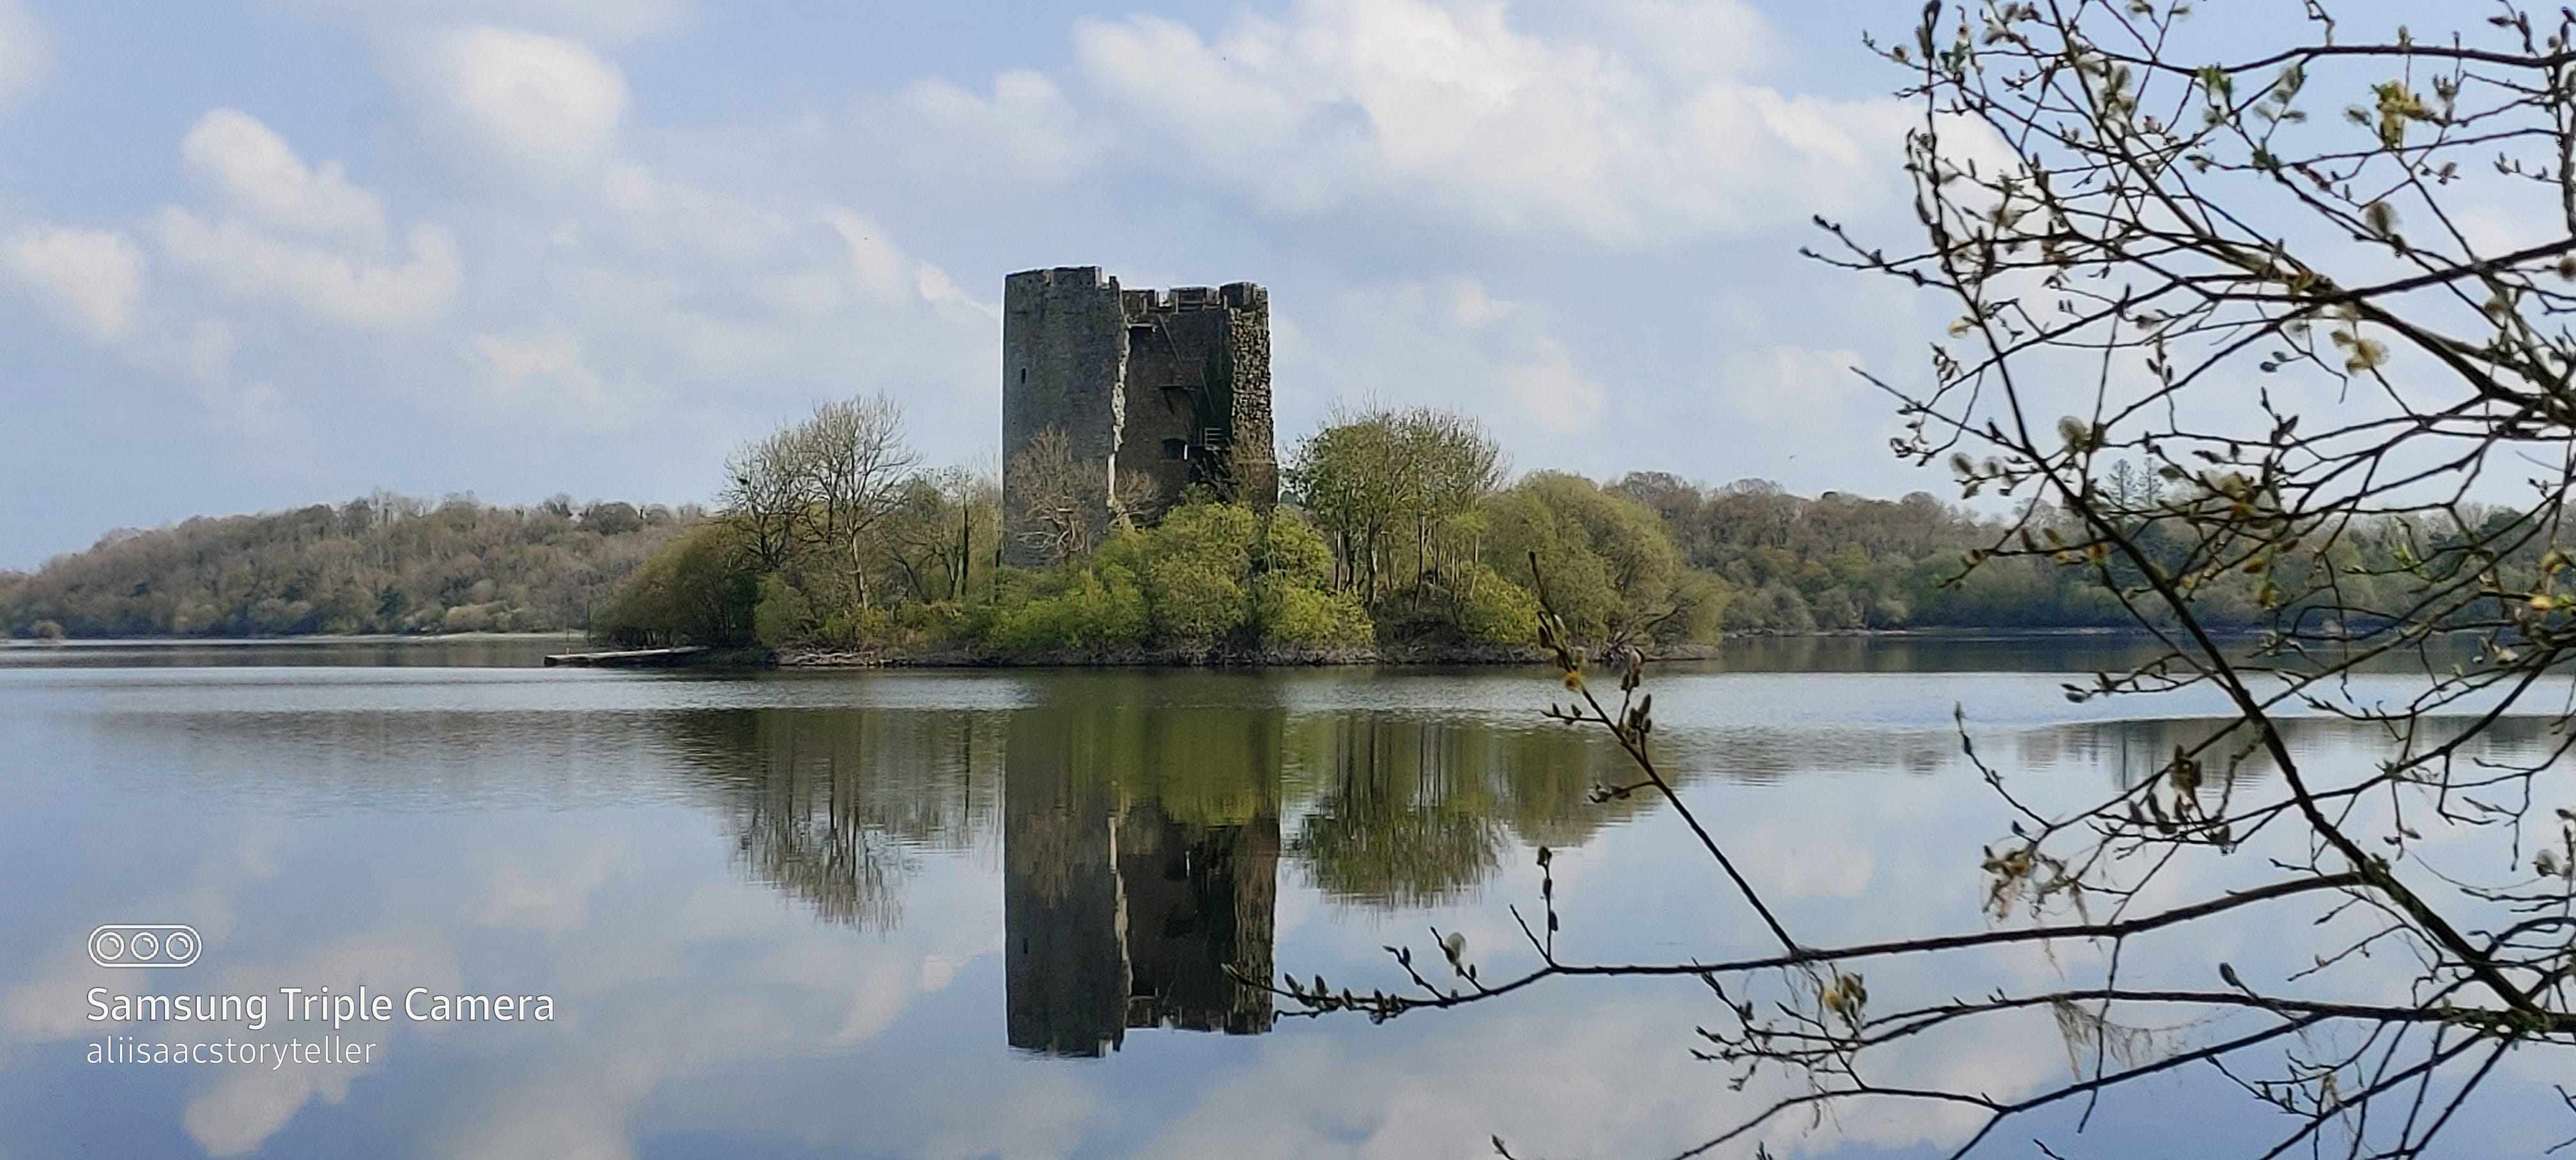 The ruined face of a round tower-house style castle appears to rise out of the still waters of a lake, its base shrouded with trees and shrubs. The cloud-studded sky is perfectly reflected in the lake, the water is still as a mirror.